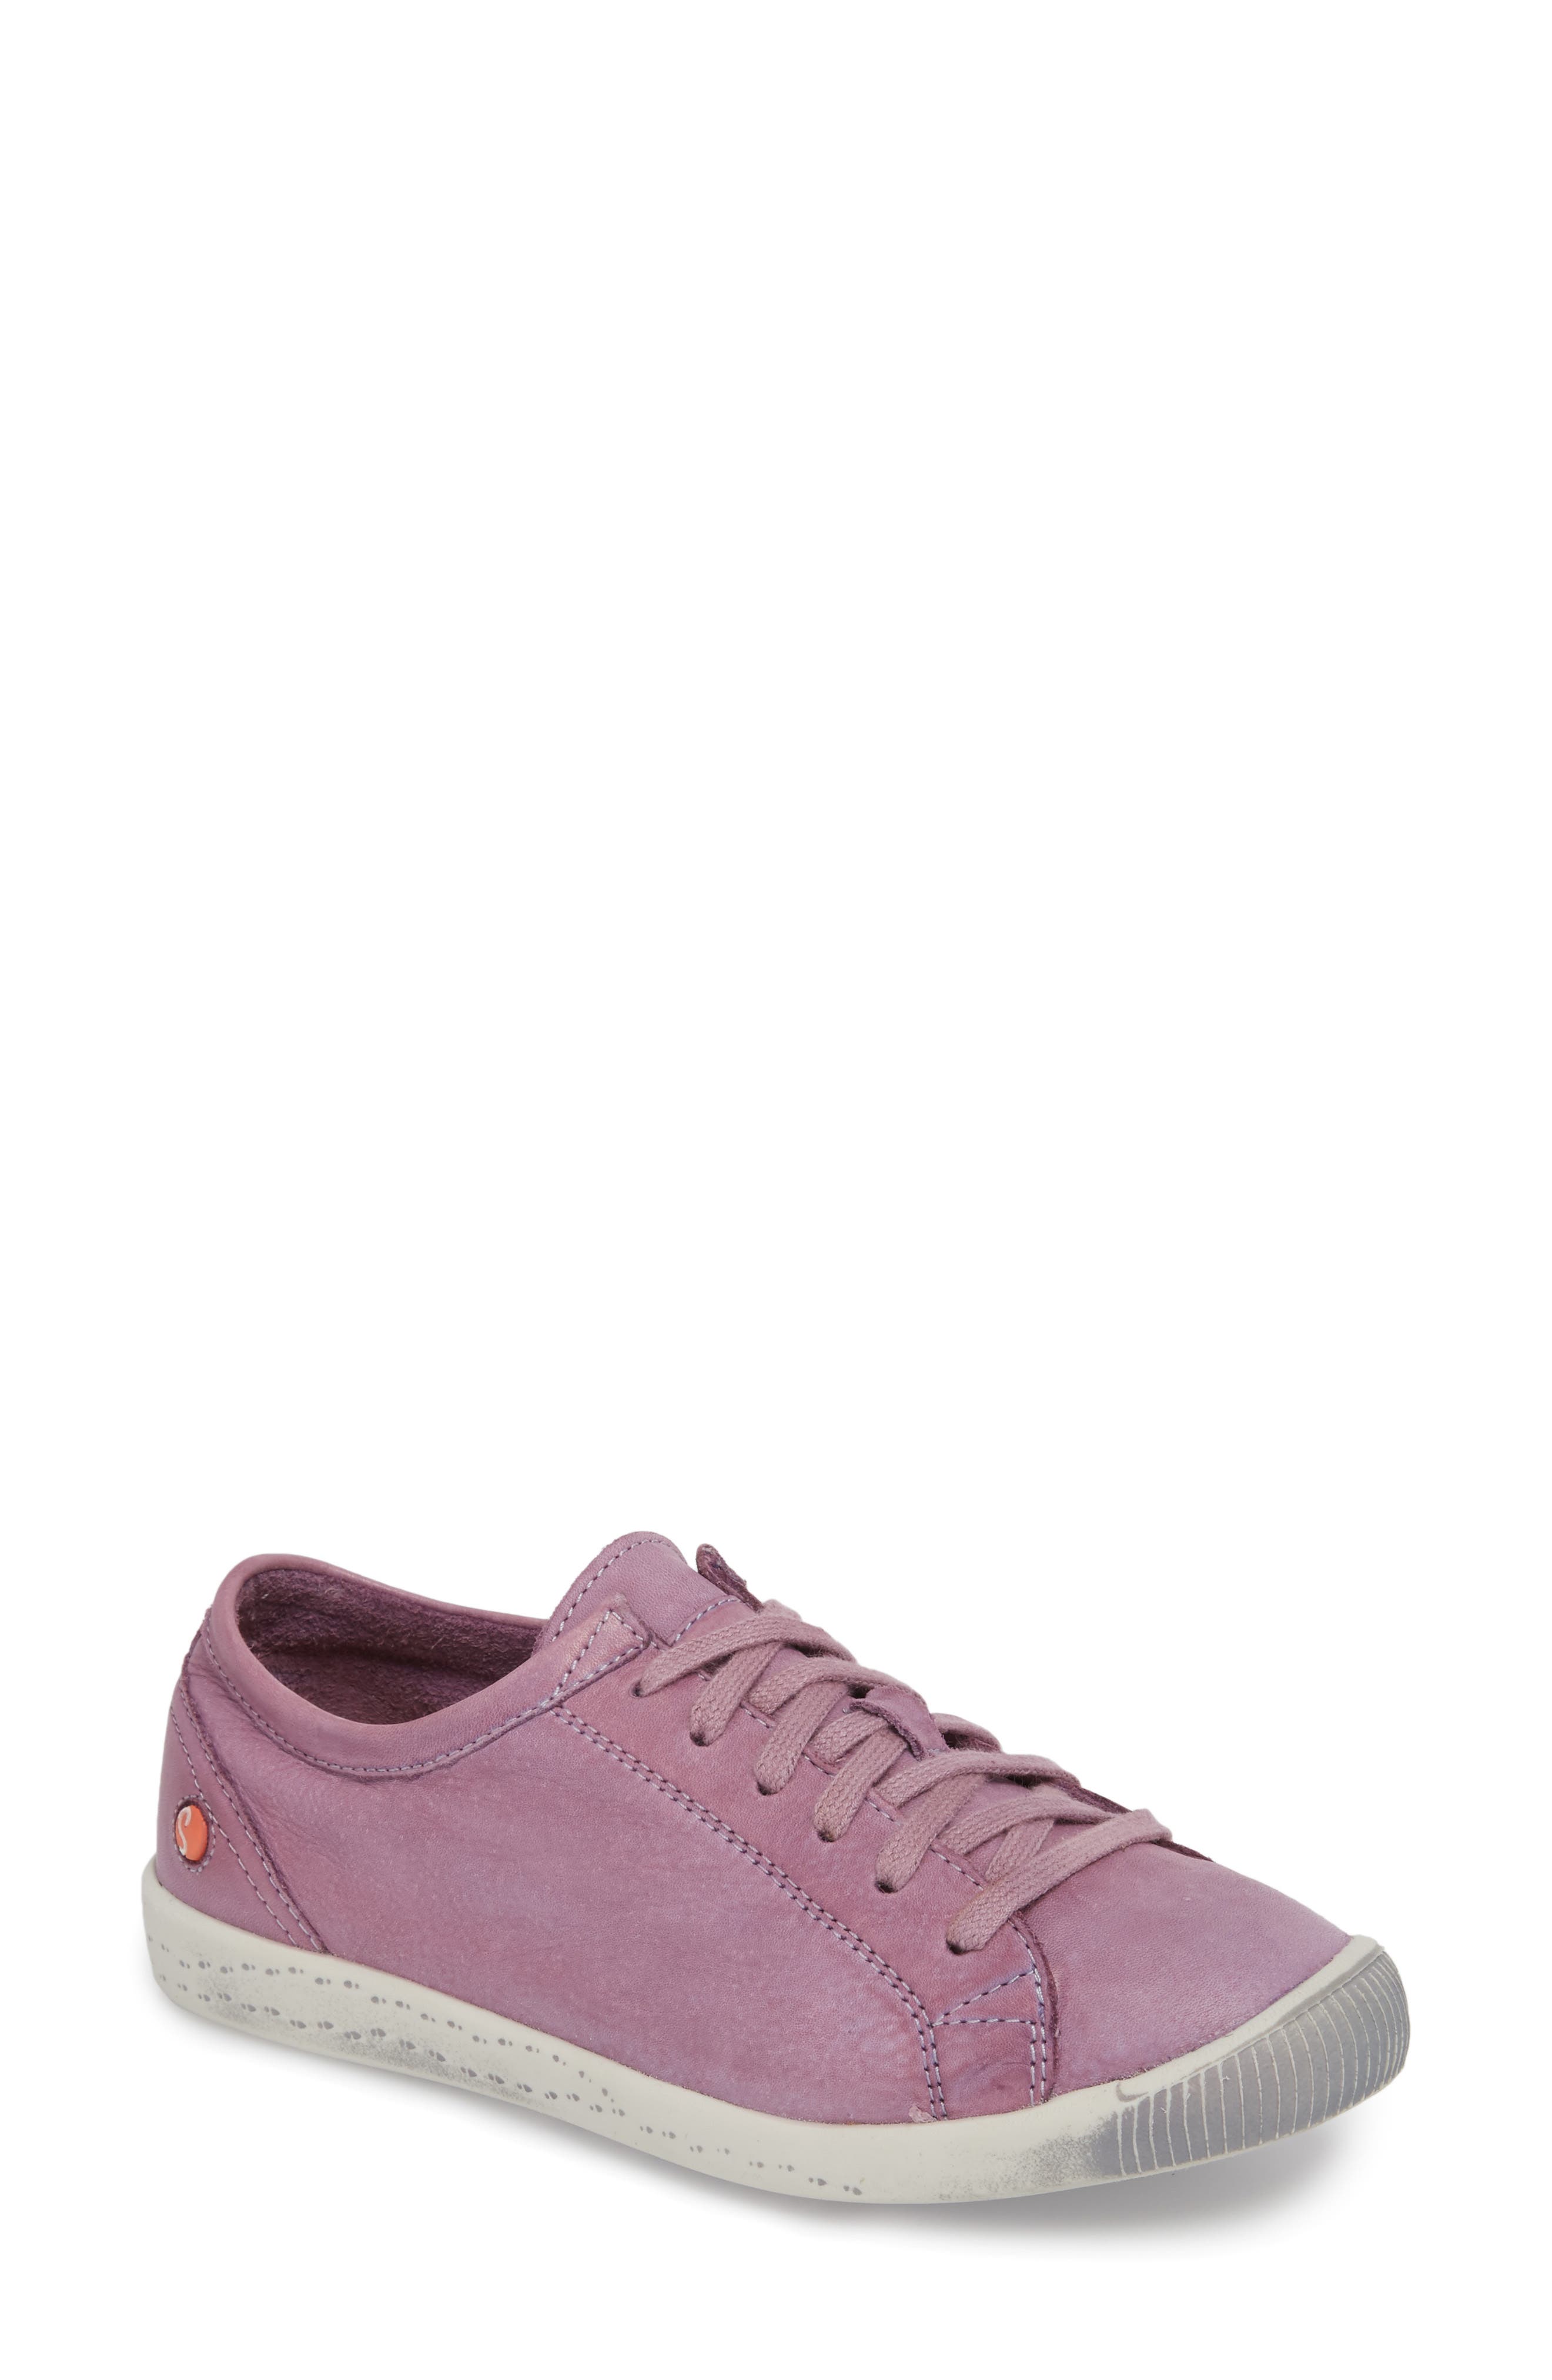 Softinos By Fly London Isla Distressed Sneaker In Lilac Leather